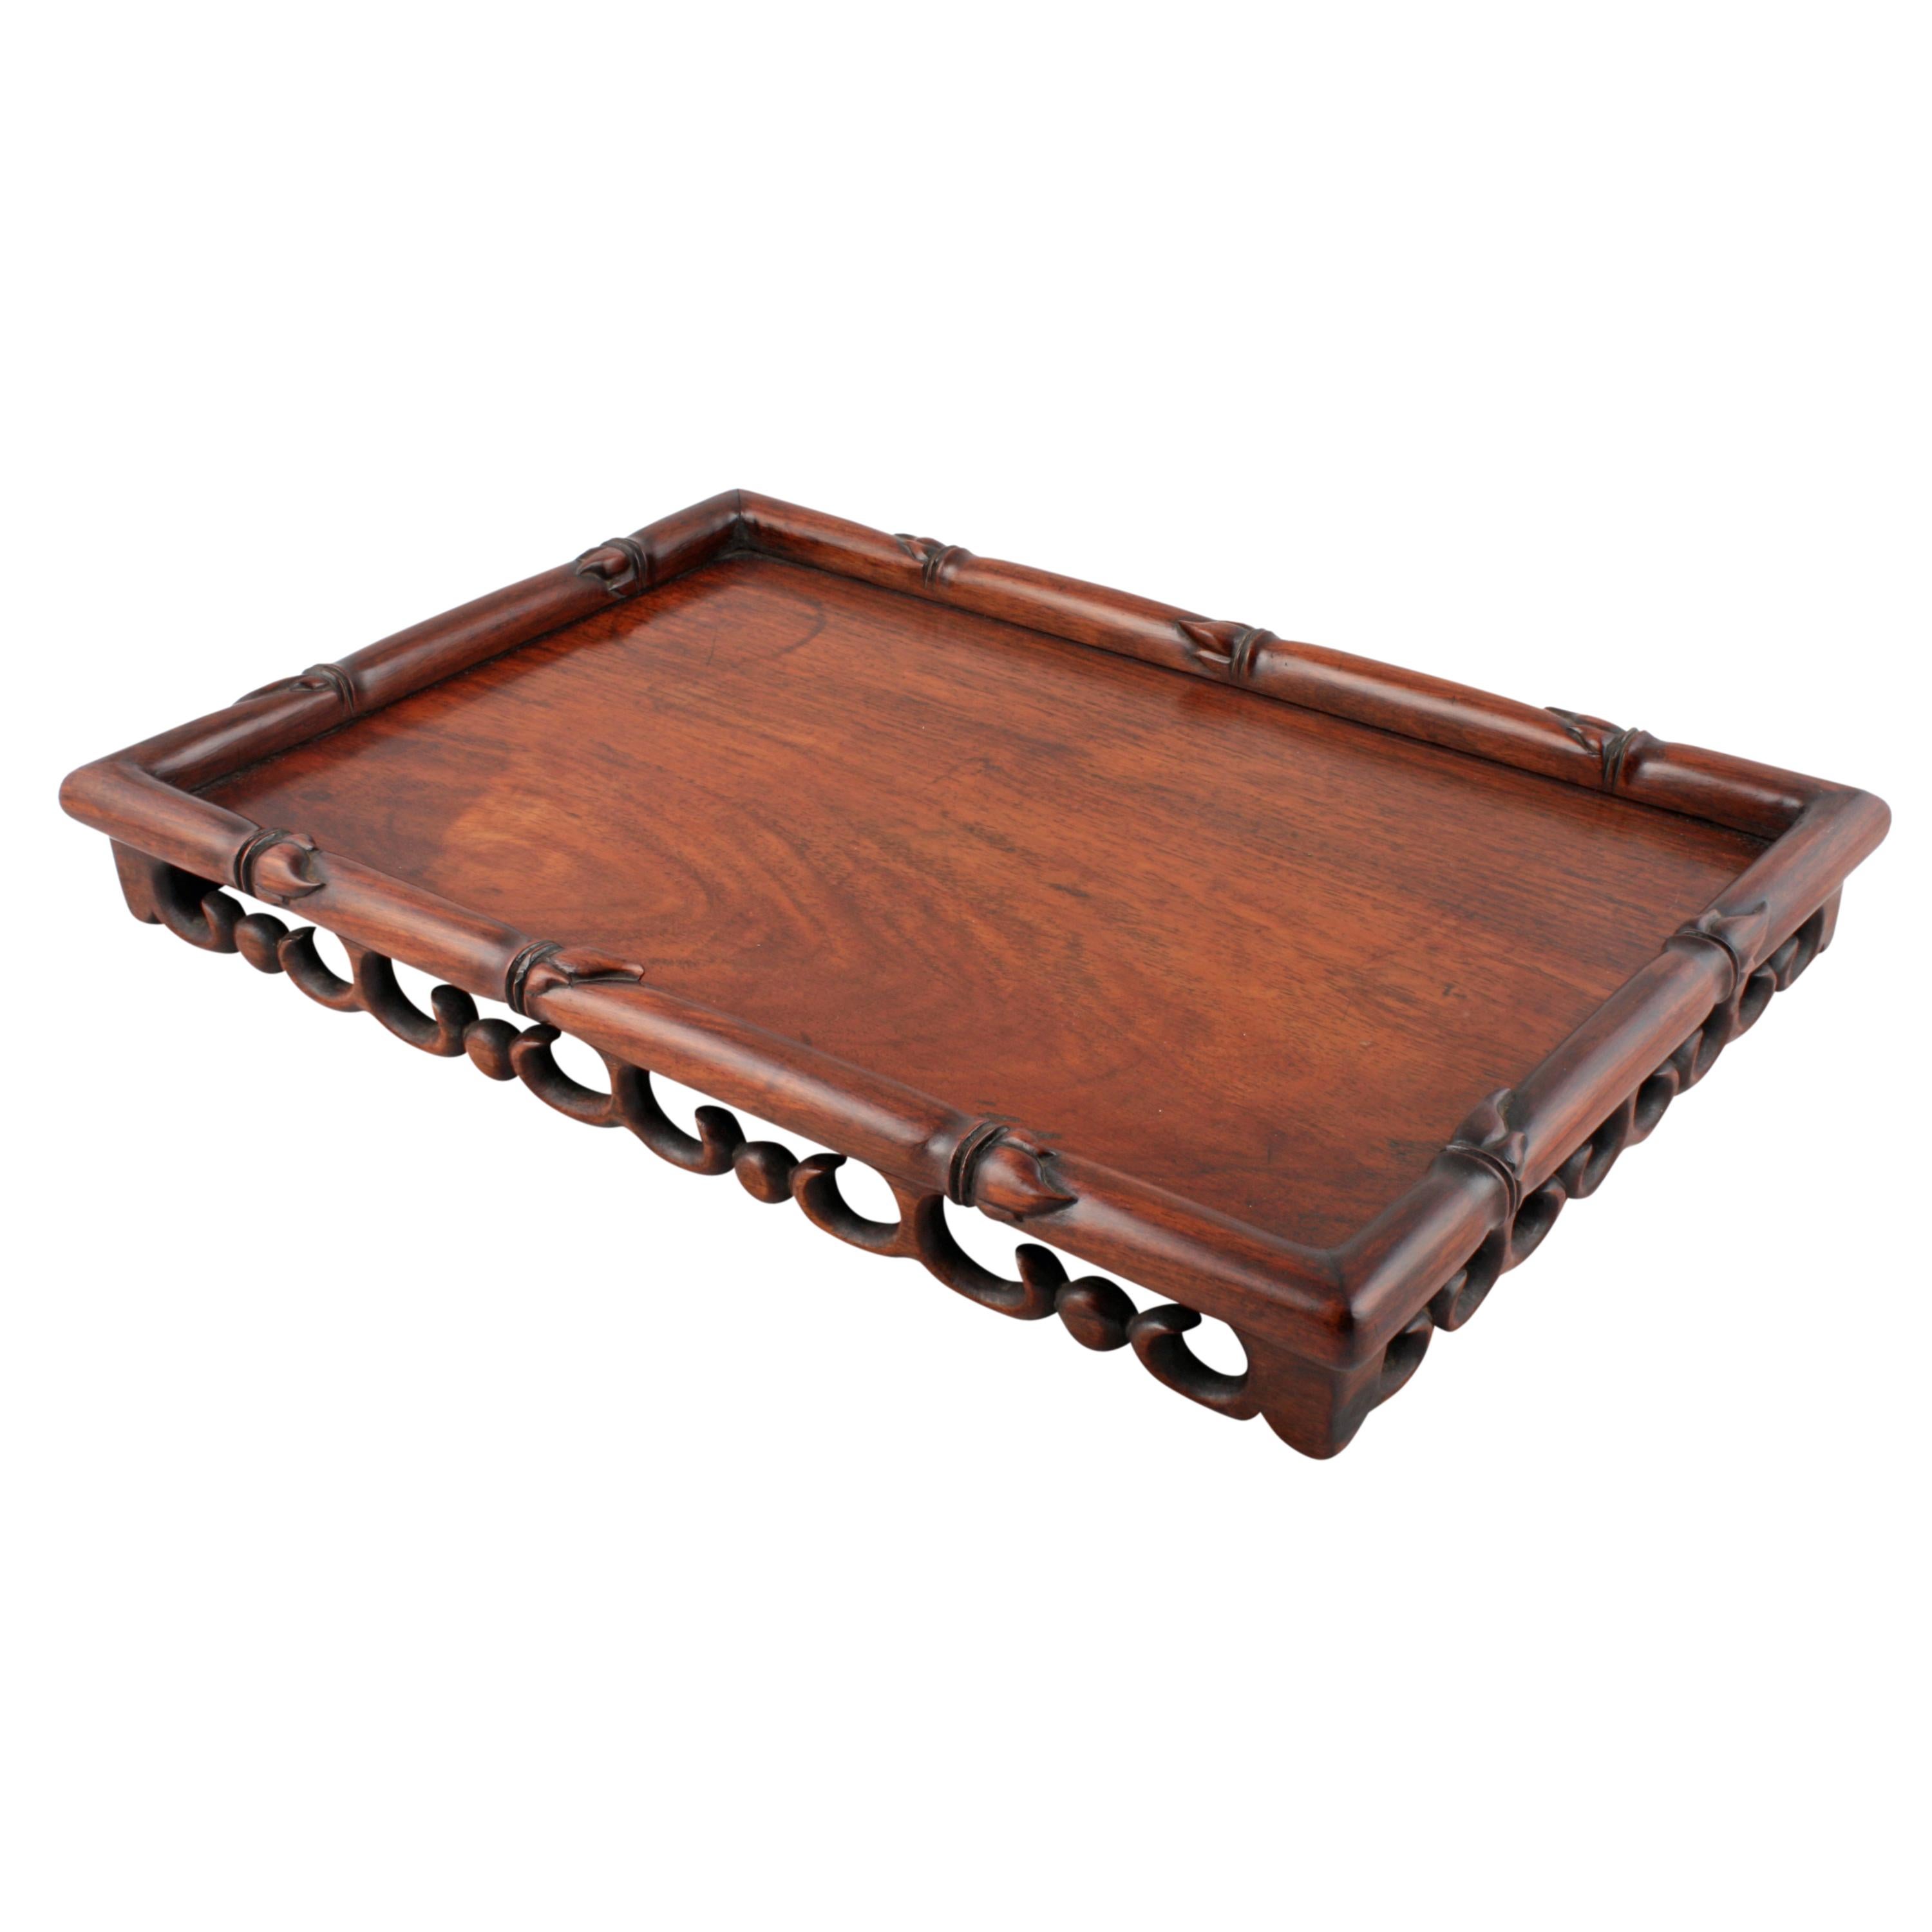 A late 19th century Chinese faux bamboo rosewood scholar's or scribe's tray.

The tray has a turned and carved faux bamboo rosewood edge and is lifted on a pierced carved scrolling gallery to all sides.

The tray is made from solid rosewood and